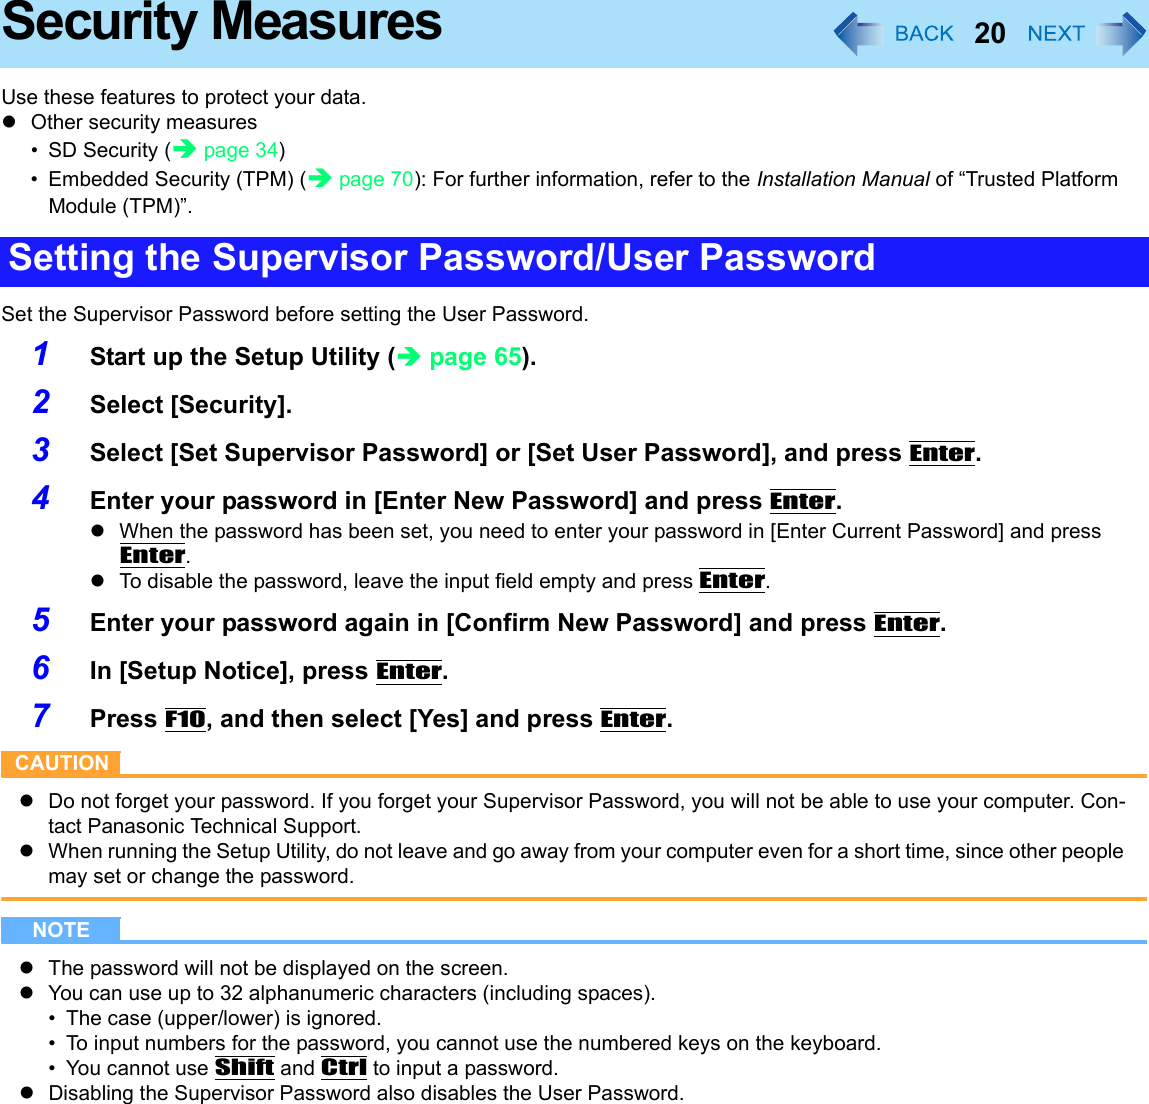 20Security MeasuresUse these features to protect your data.zOther security measures•SD Security (Îpage 34)• Embedded Security (TPM) (Îpage 70): For further information, refer to the Installation Manual of “Trusted Platform Module (TPM)”.Set the Supervisor Password before setting the User Password.1Start up the Setup Utility (Îpage 65).2Select [Security].3Select [Set Supervisor Password] or [Set User Password], and press Enter.4Enter your password in [Enter New Password] and press Enter.zWhen the password has been set, you need to enter your password in [Enter Current Password] and press Enter.zTo disable the password, leave the input field empty and press Enter.5Enter your password again in [Confirm New Password] and press Enter.6In [Setup Notice], press Enter.7Press F10, and then select [Yes] and press Enter.CAUTIONzDo not forget your password. If you forget your Supervisor Password, you will not be able to use your computer. Con-tact Panasonic Technical Support.zWhen running the Setup Utility, do not leave and go away from your computer even for a short time, since other people may set or change the password.NOTEzThe password will not be displayed on the screen.zYou can use up to 32 alphanumeric characters (including spaces).• The case (upper/lower) is ignored.• To input numbers for the password, you cannot use the numbered keys on the keyboard.• You cannot use Shift and Ctrl to input a password.zDisabling the Supervisor Password also disables the User Password.Setting the Supervisor Password/User Password